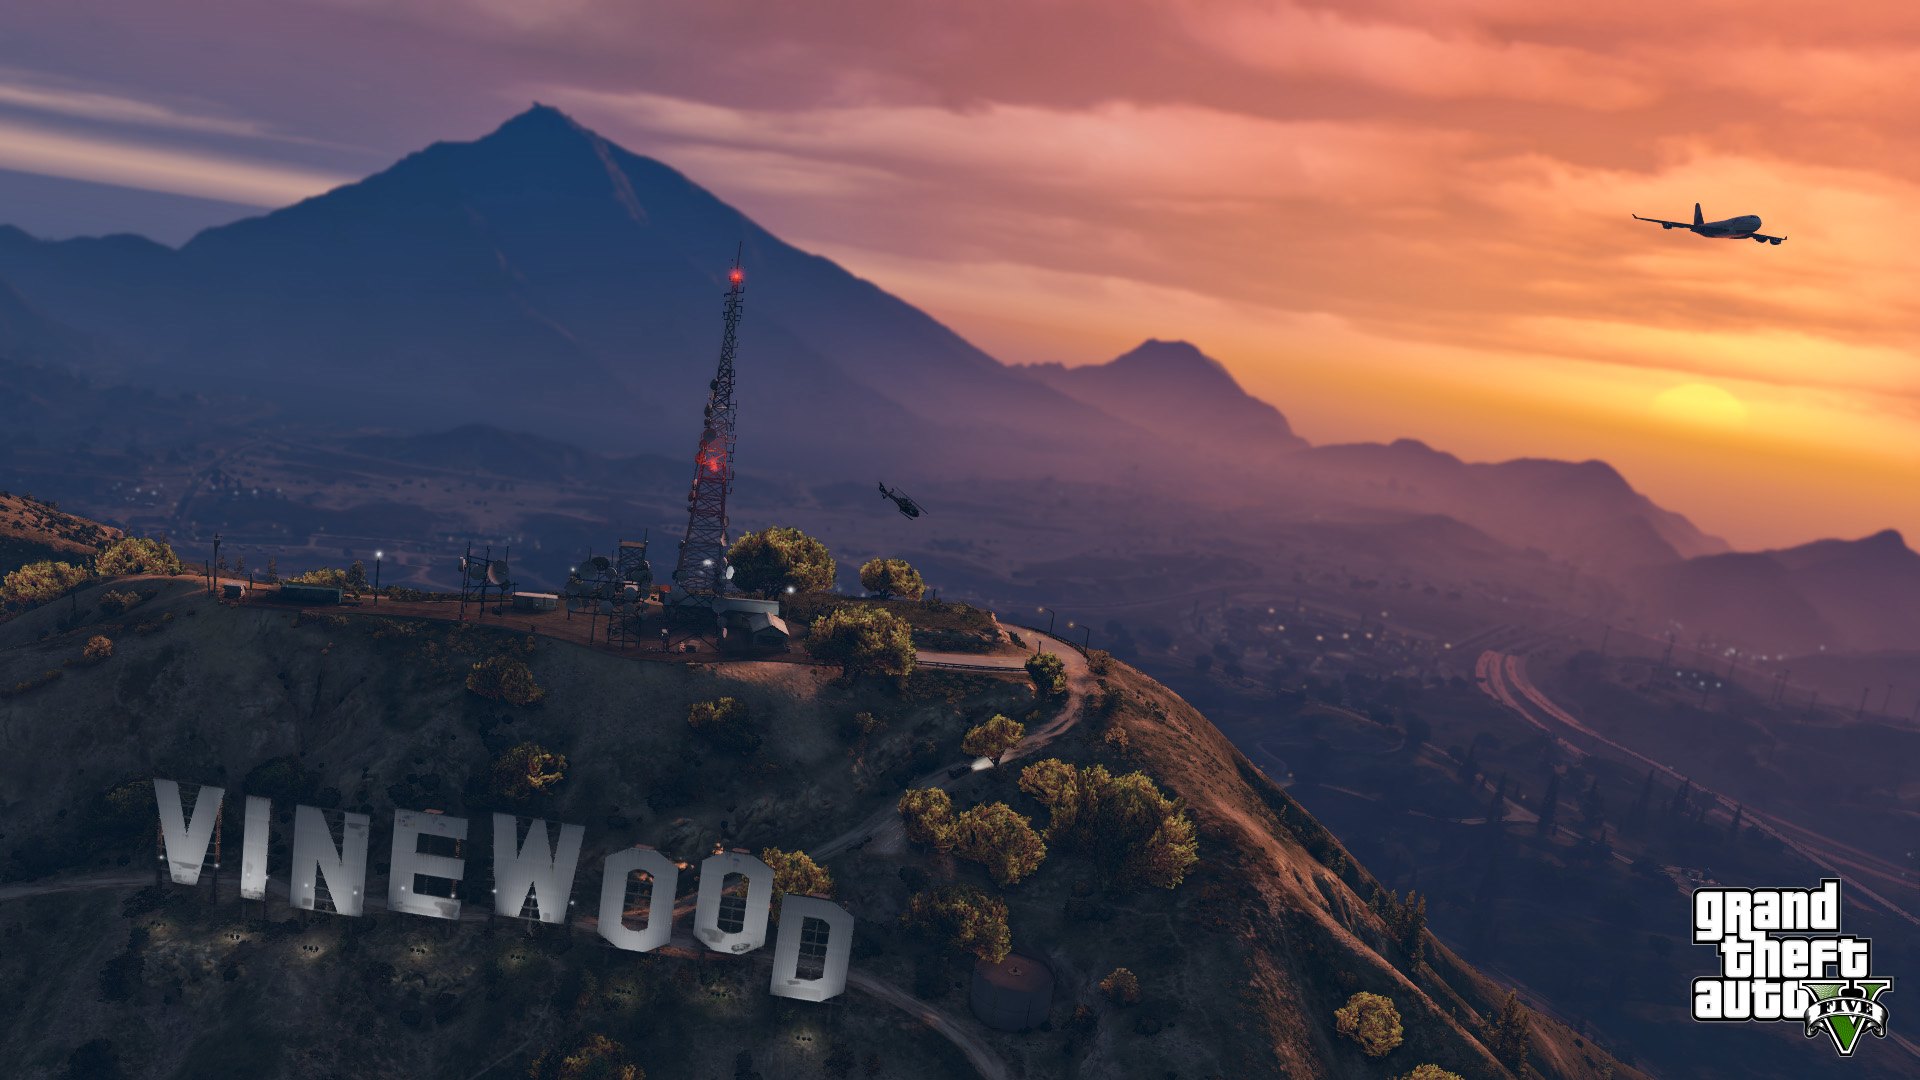 ✅ Grand Theft Auto V + Mount Blade II Bannerlord